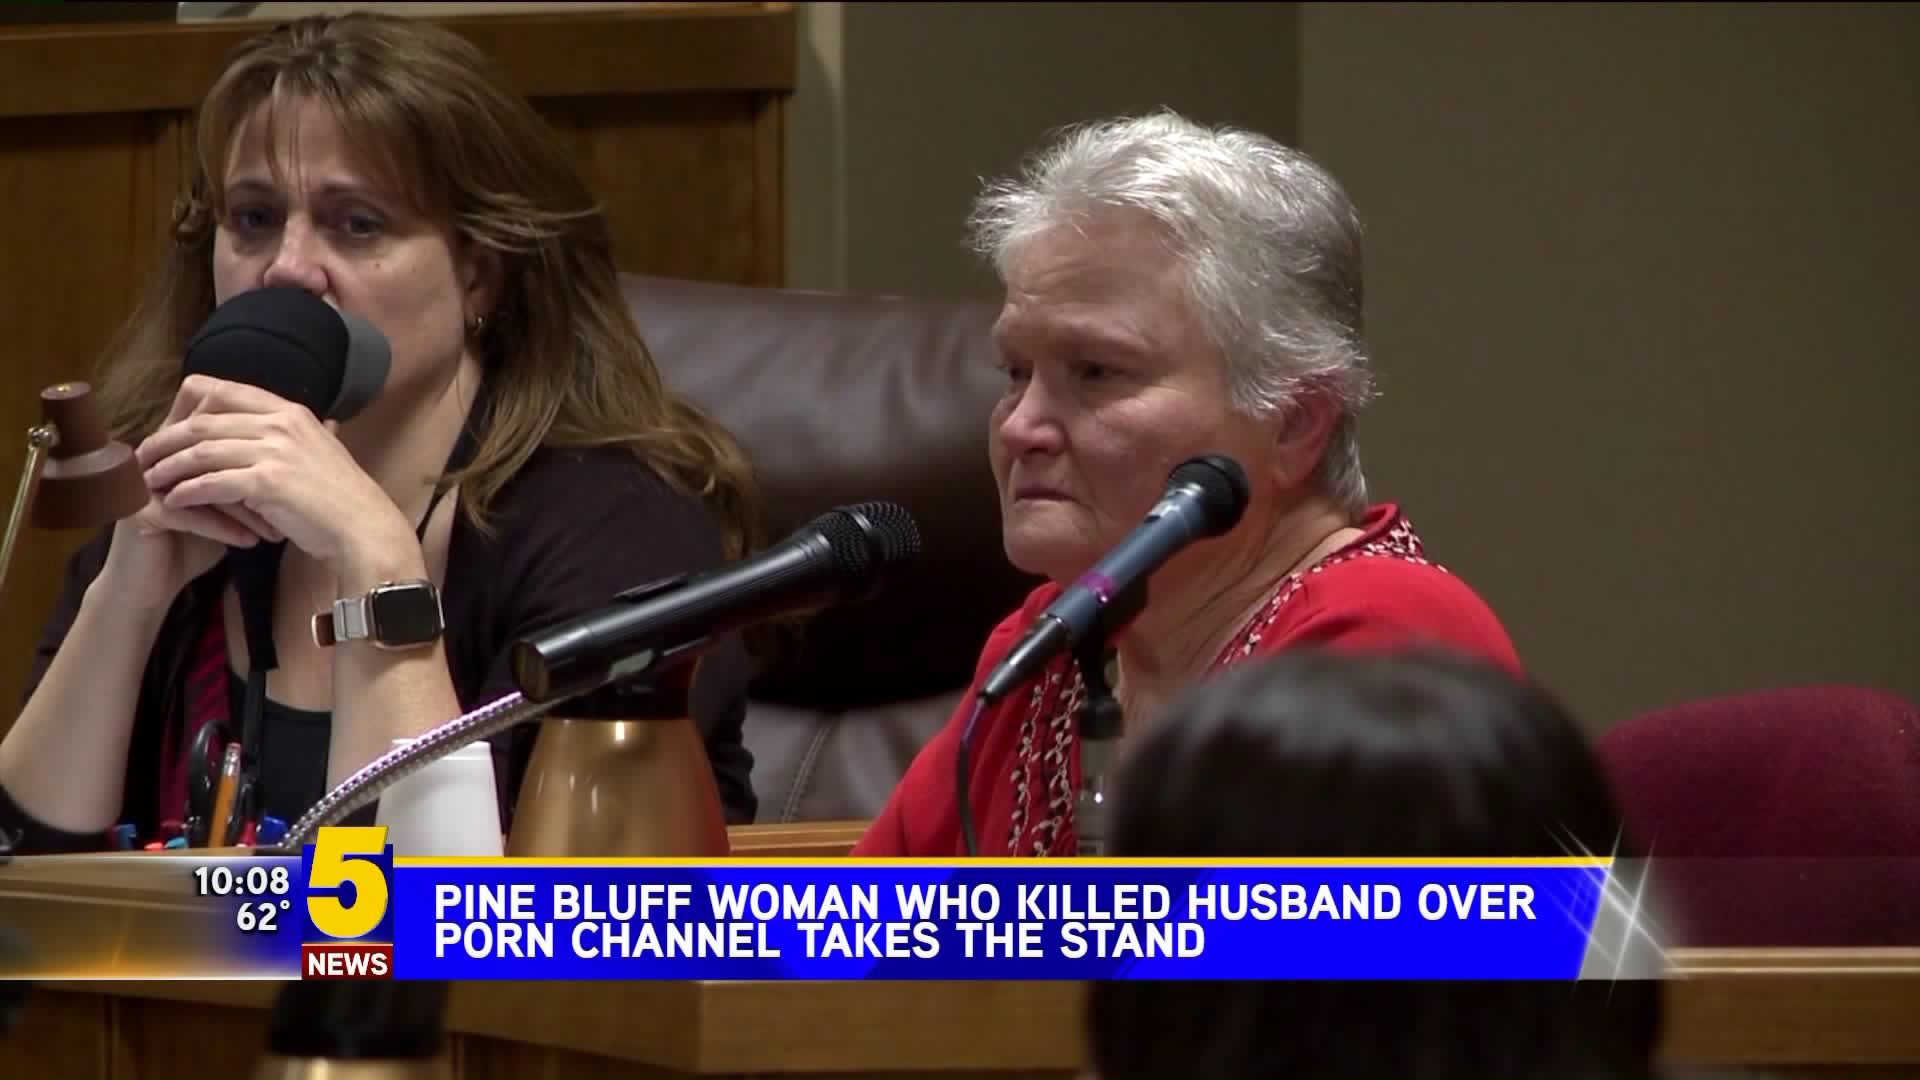 Pine Bluff Woman Who Killed Husband Over Porn Channel Take the Stand